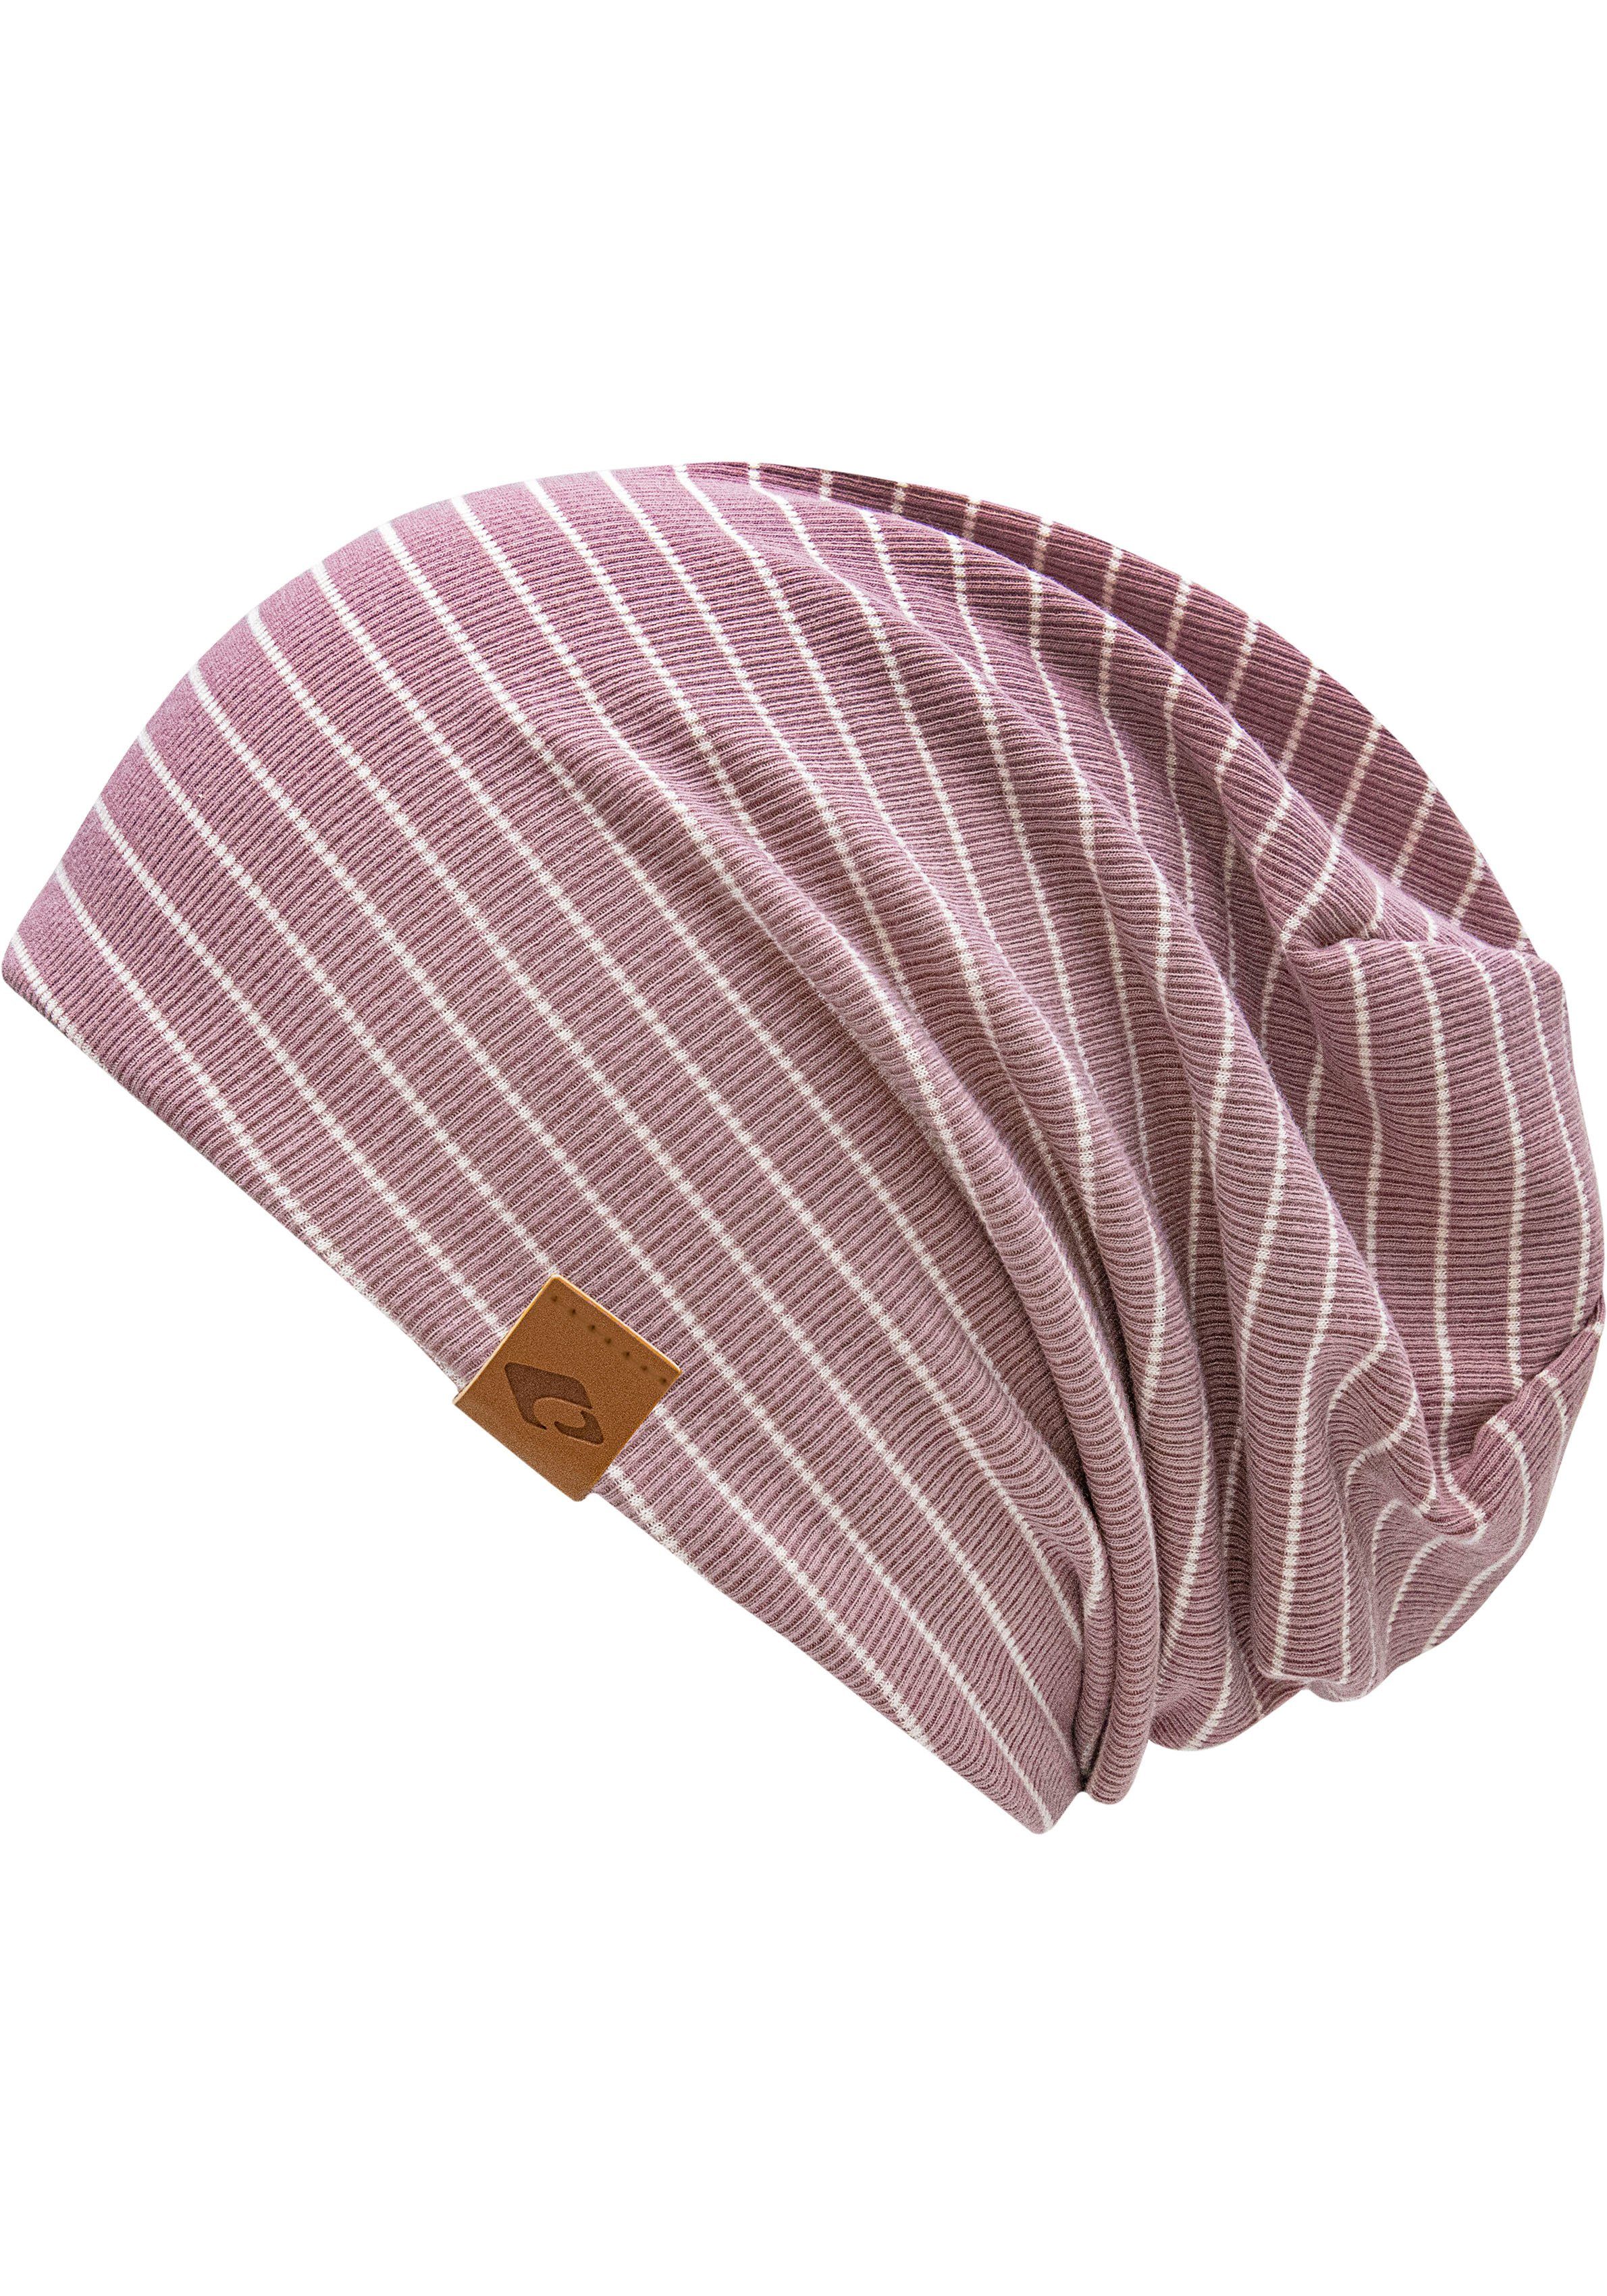 chillouts Beanie Taipeh Hat burgundy